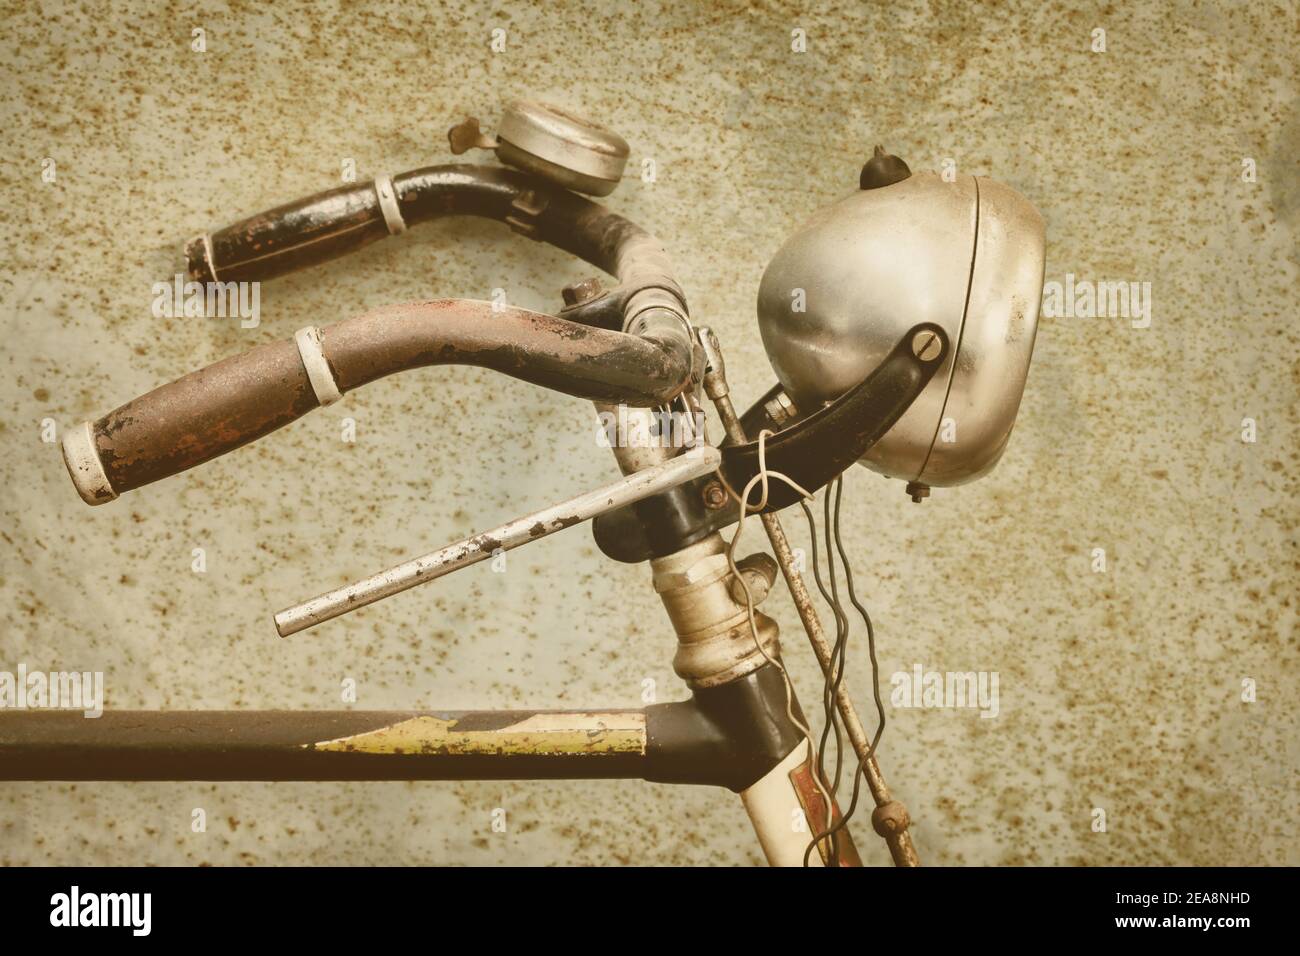 Retro styled side view of an antique bicycle with old headlight Stock Photo